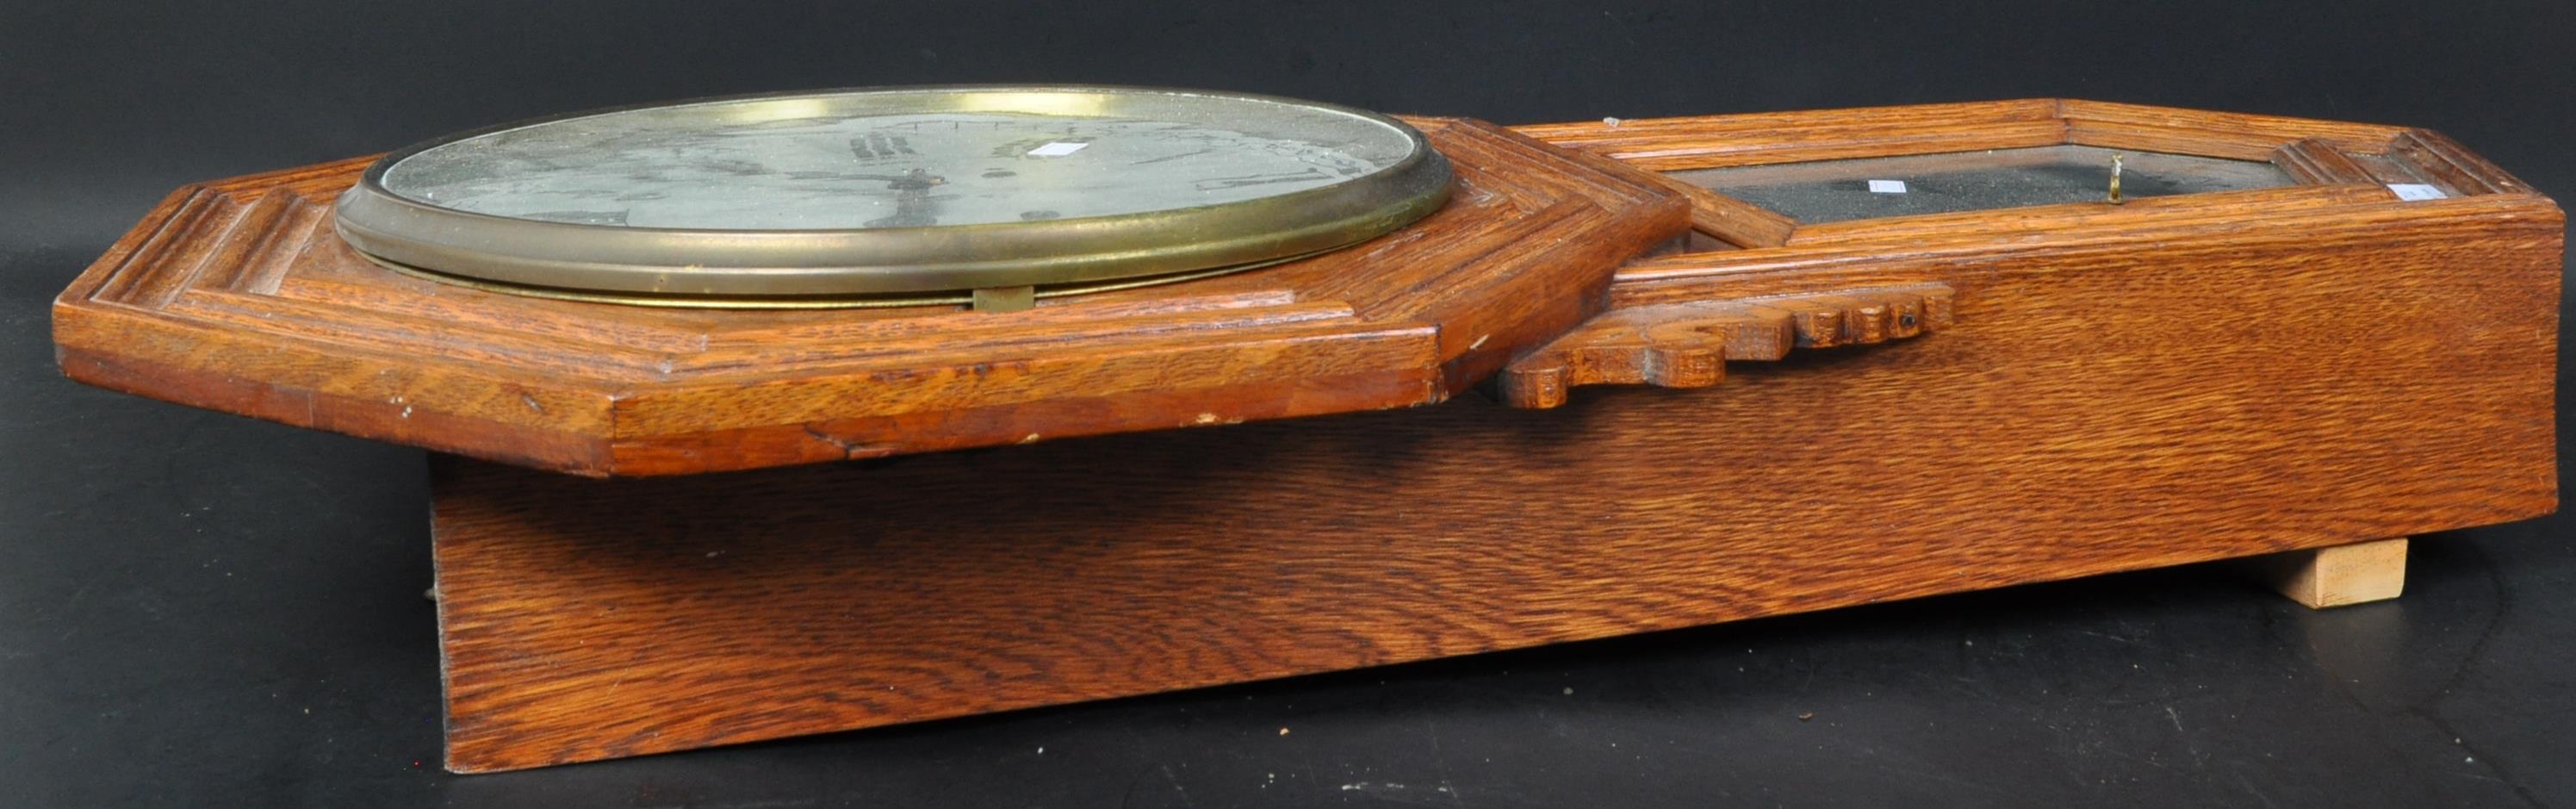 MID 20TH CENTURY ANSONIA WOODEN CASE STRIKING WALL CLOCK - Image 5 of 5